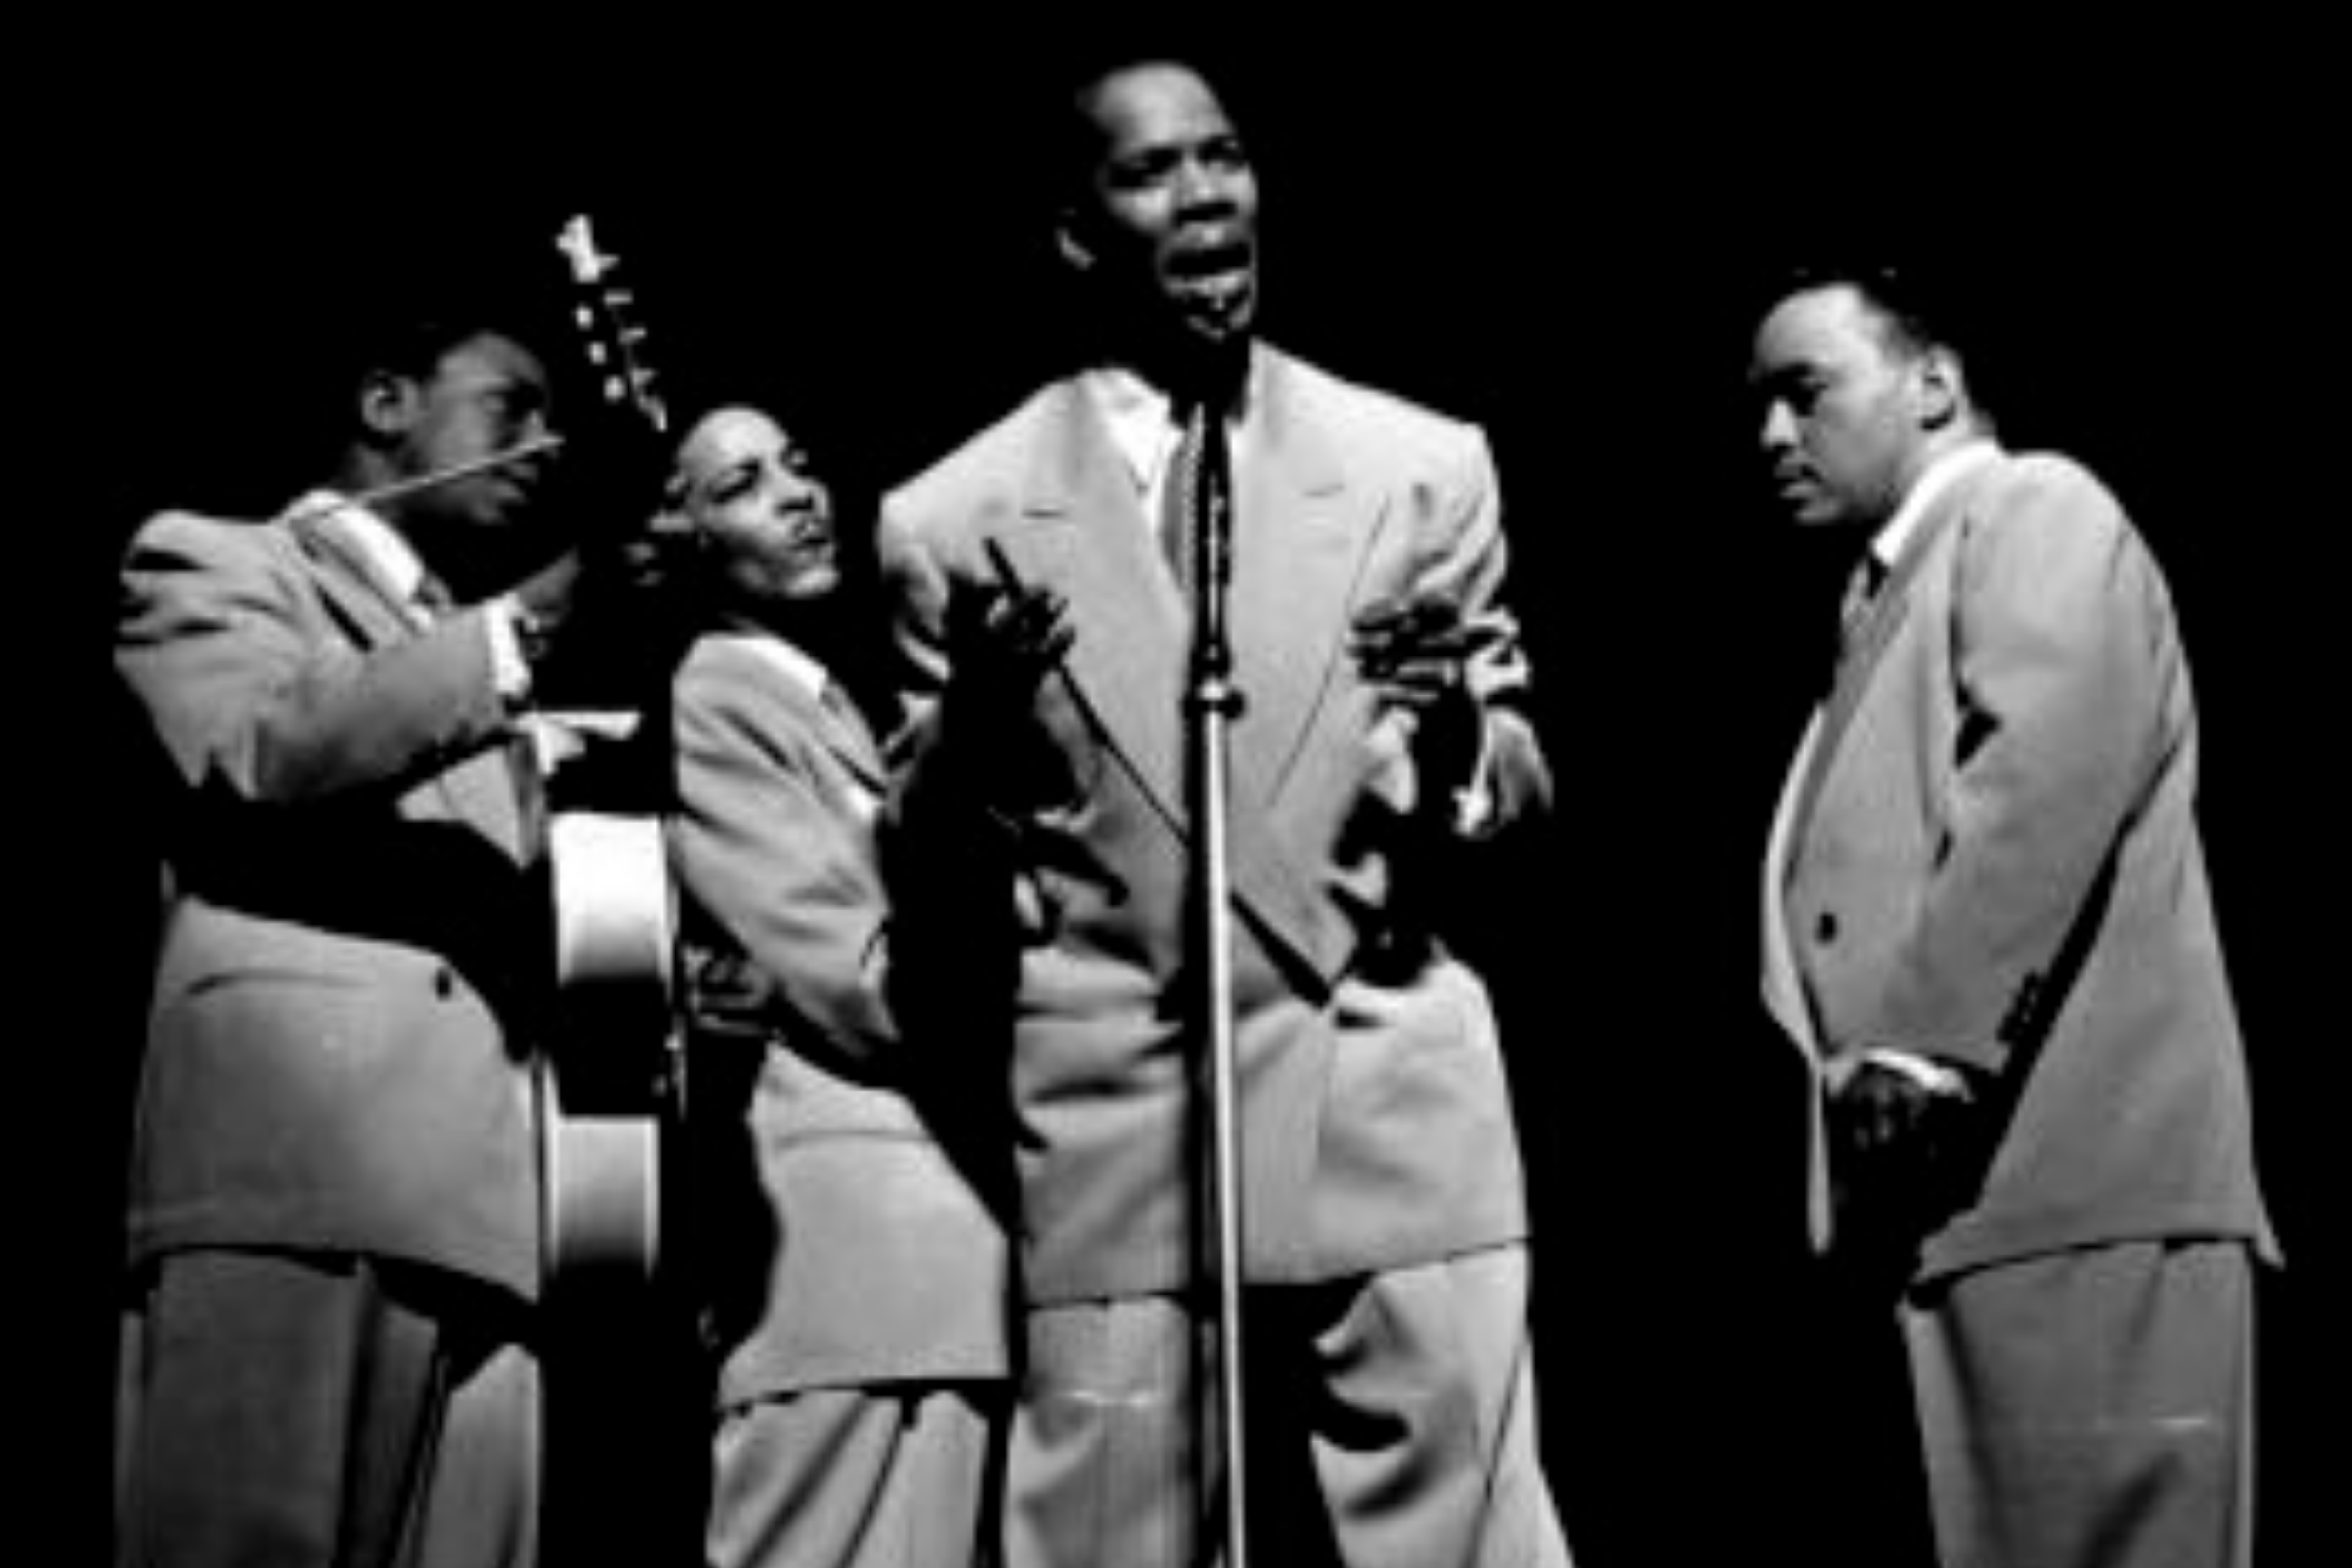 The Ink Spots perform around a single microphone in four-part harmony.